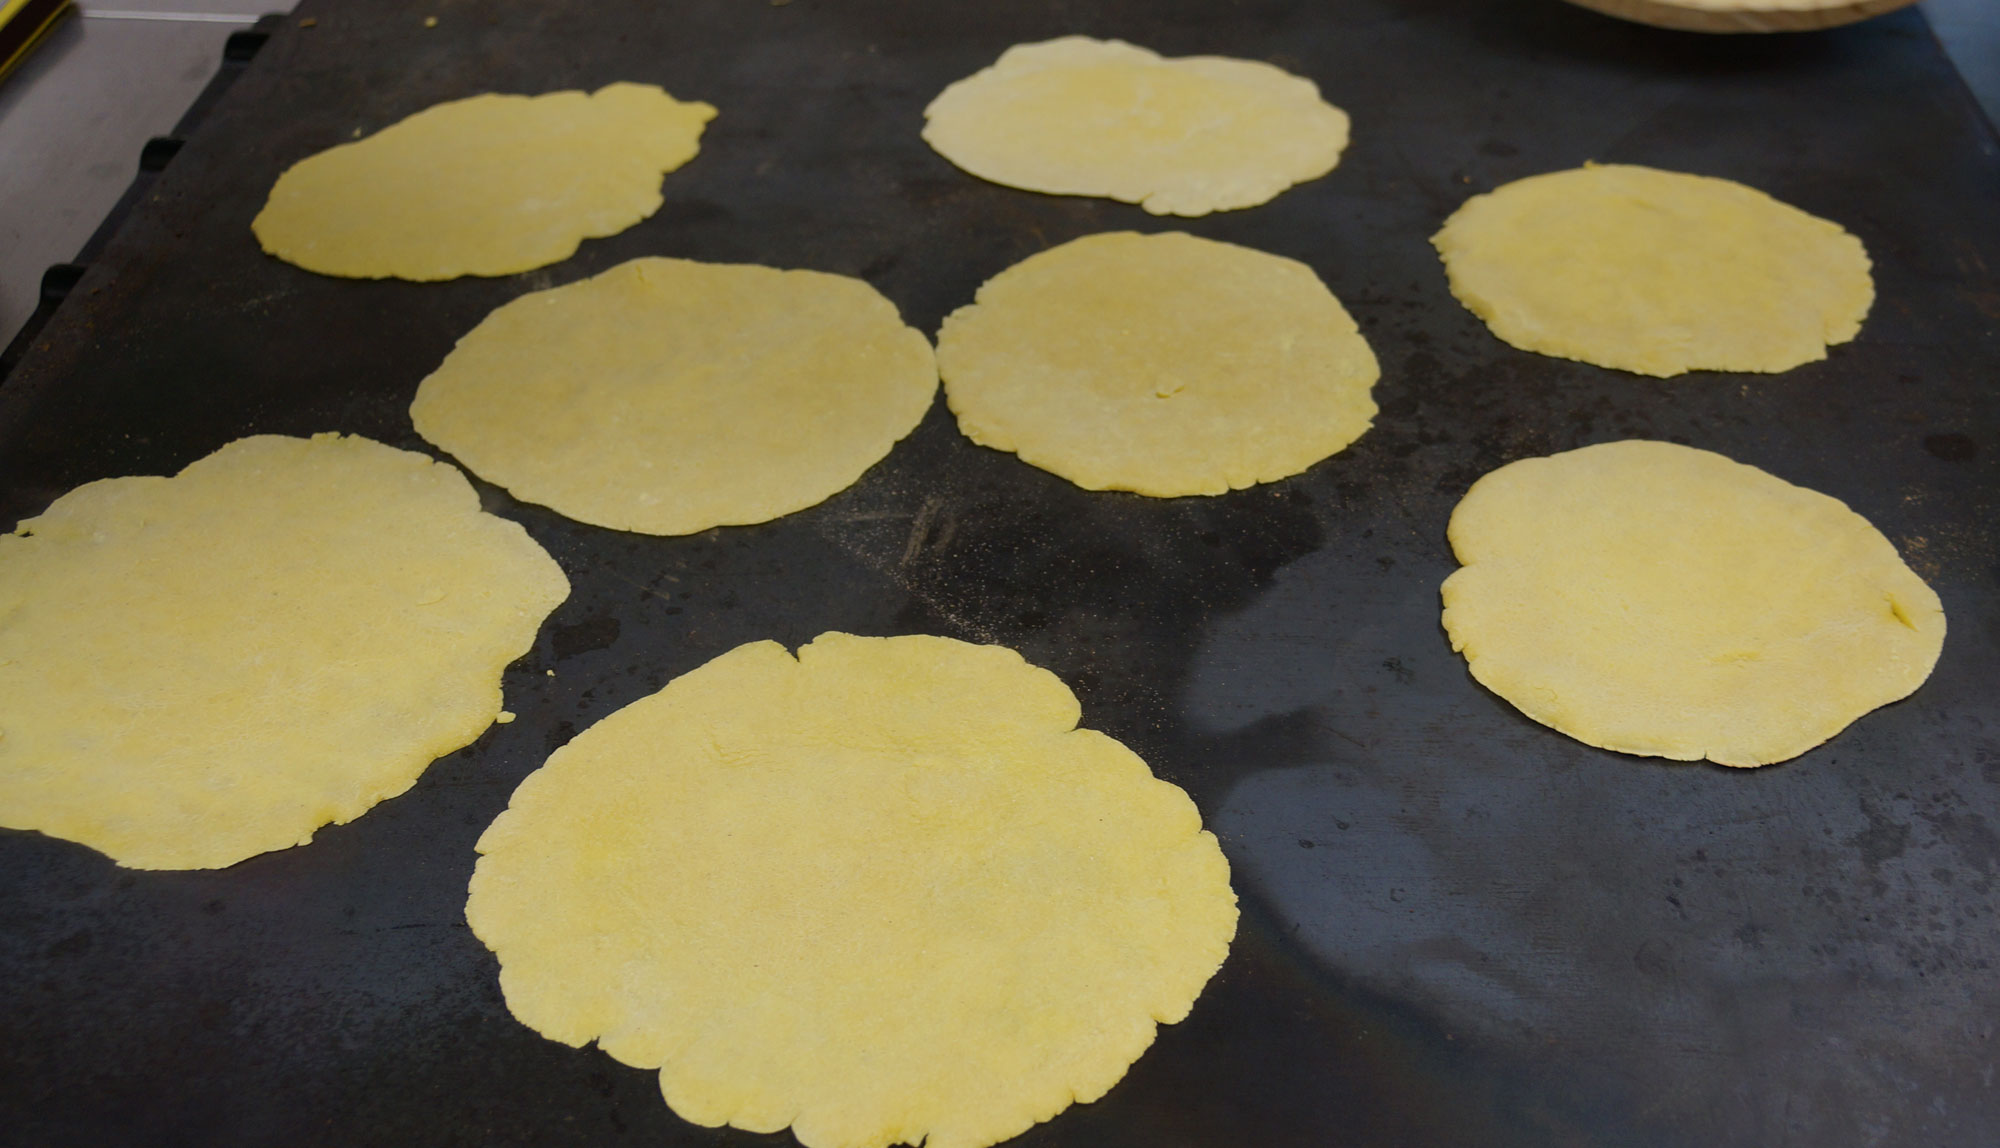 Photograph of talos cooking on a flat metal griddle. The photo shows flat, round, uncooked flatbreads made of maize flour cooking on a black metal griddle.